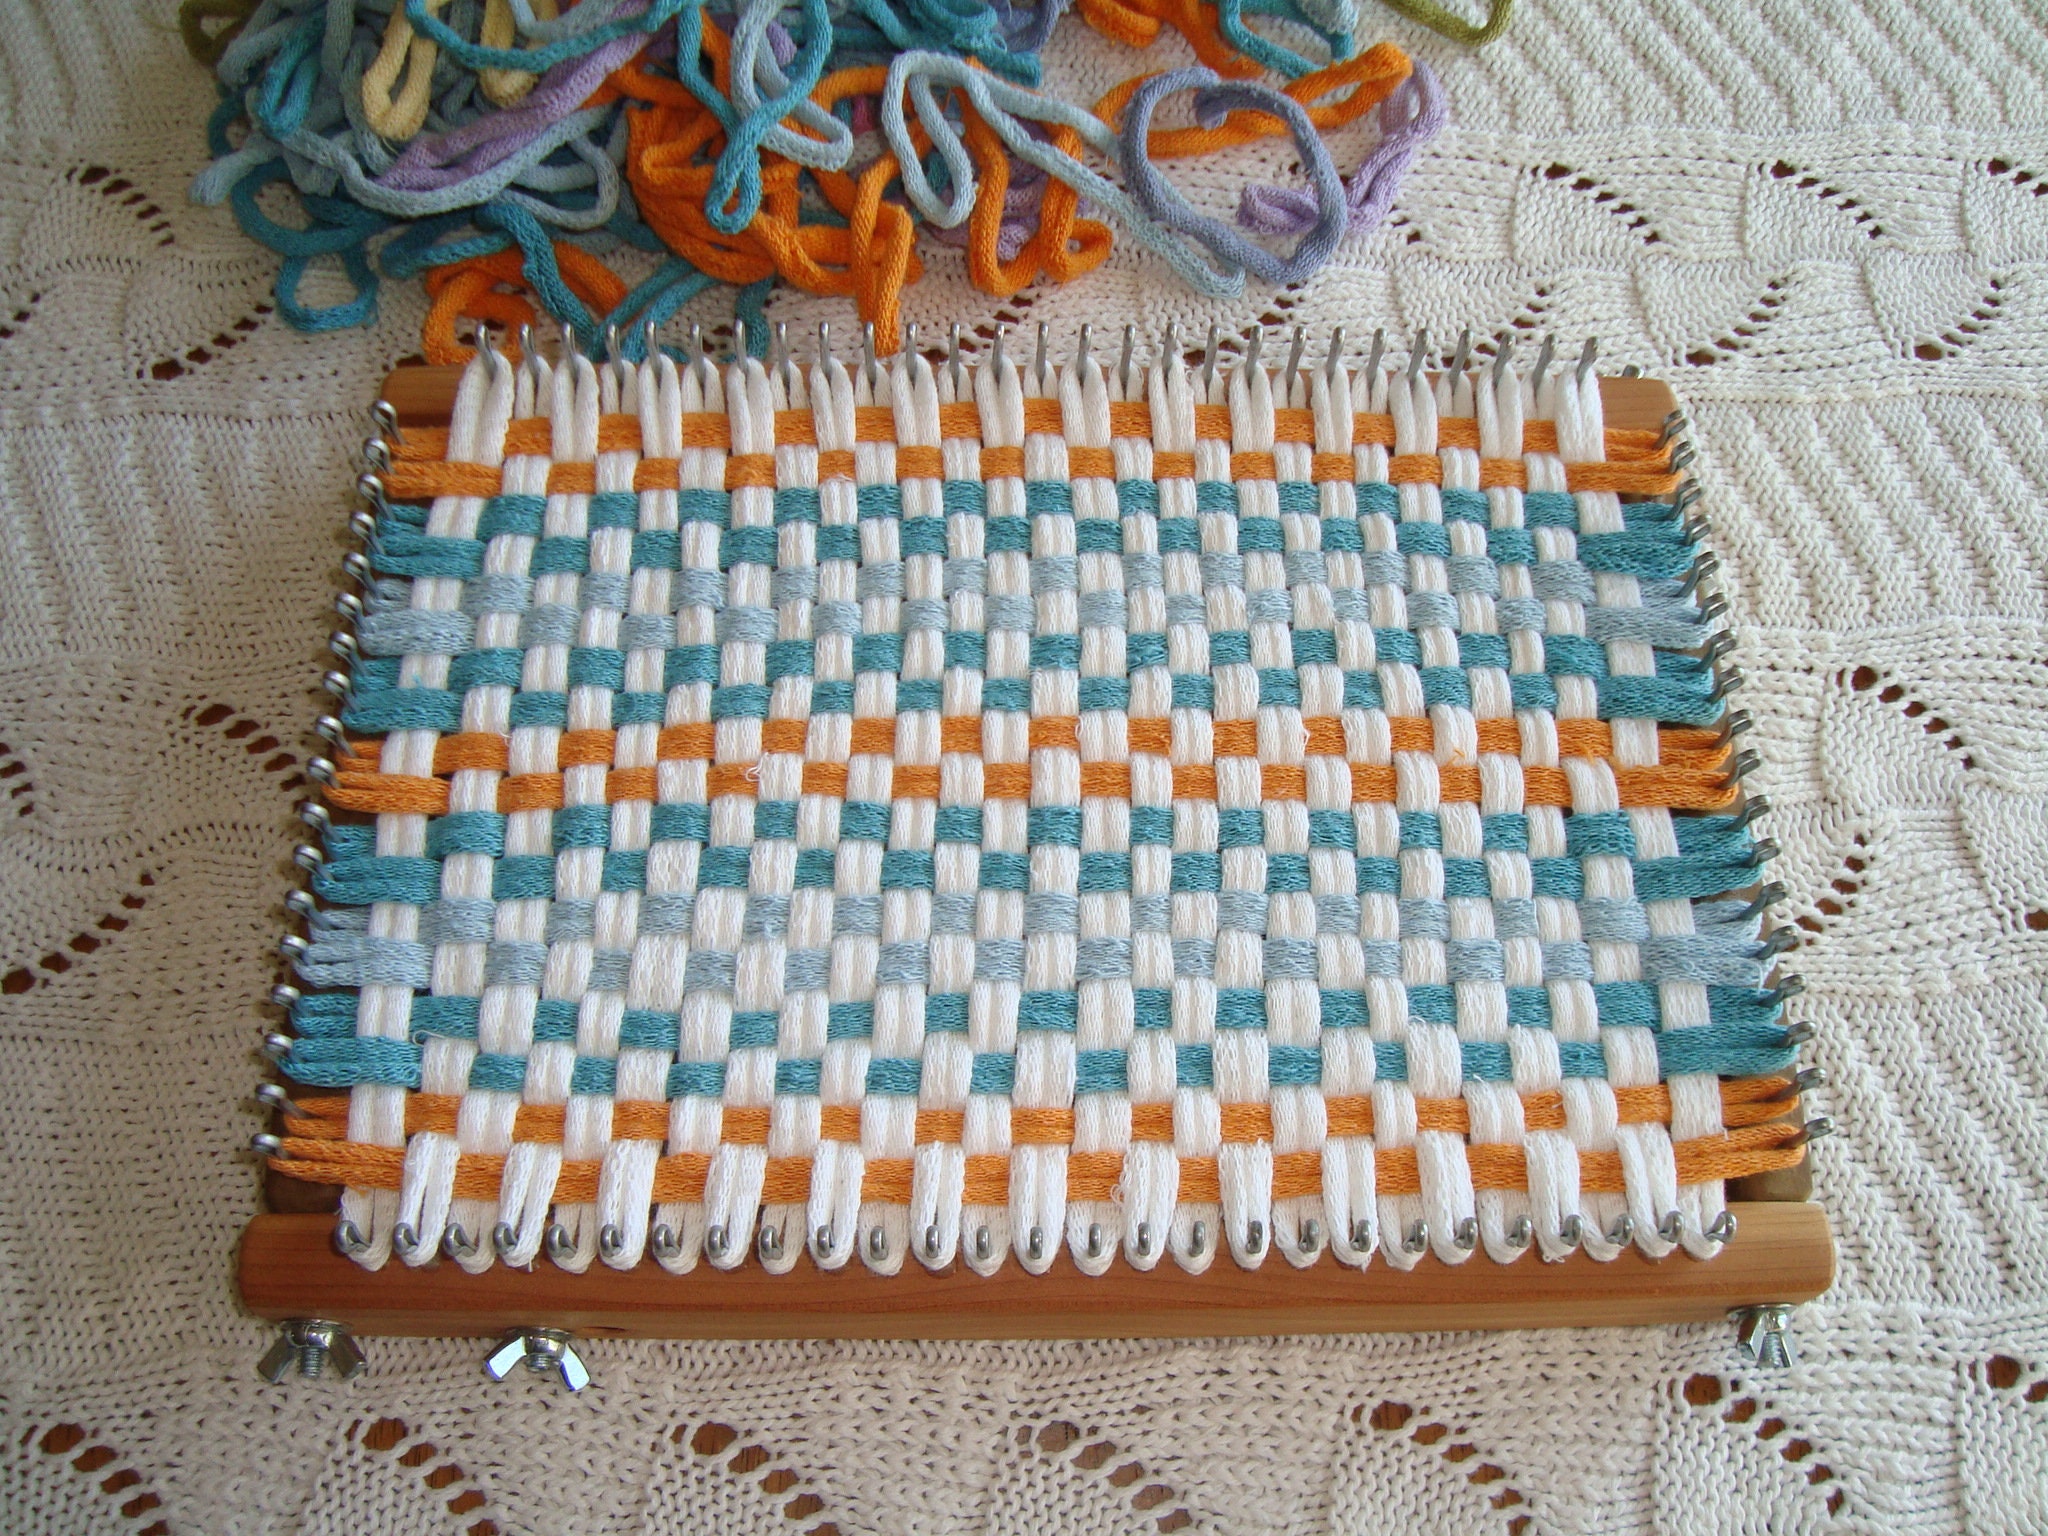 Let's Weave Again – Revisiting the Potholder Loom